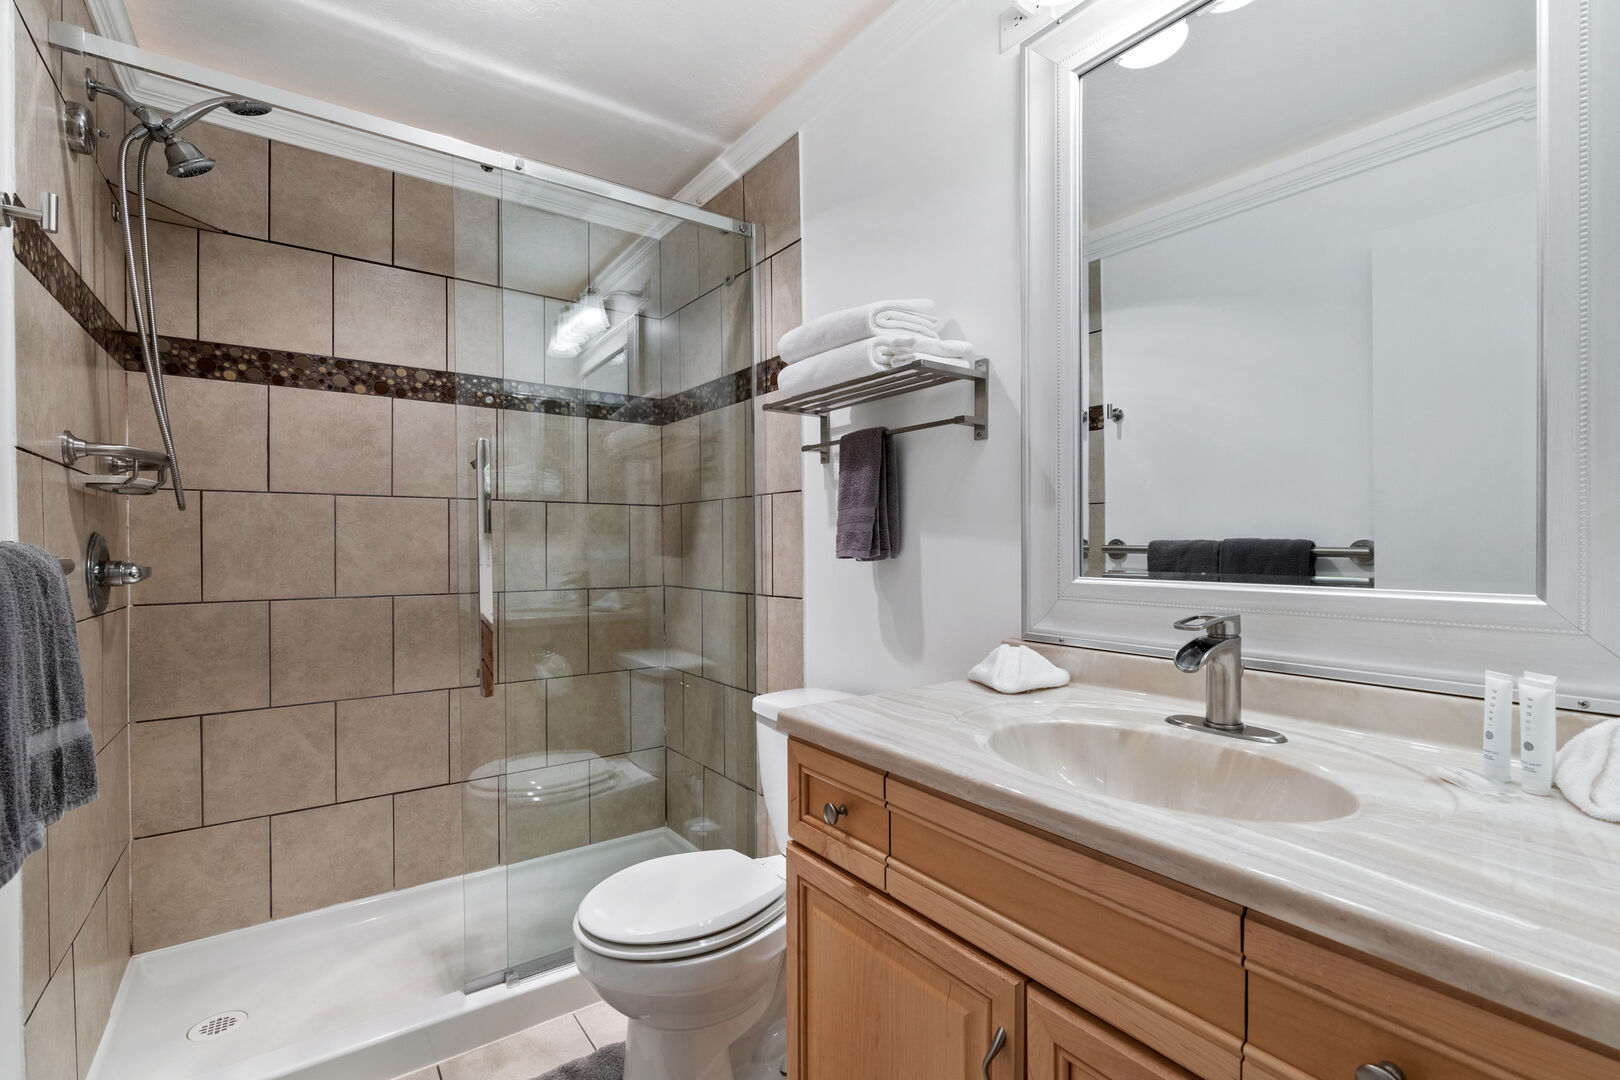 Bathroom two has a large walk-in shower and a spacious vanity.